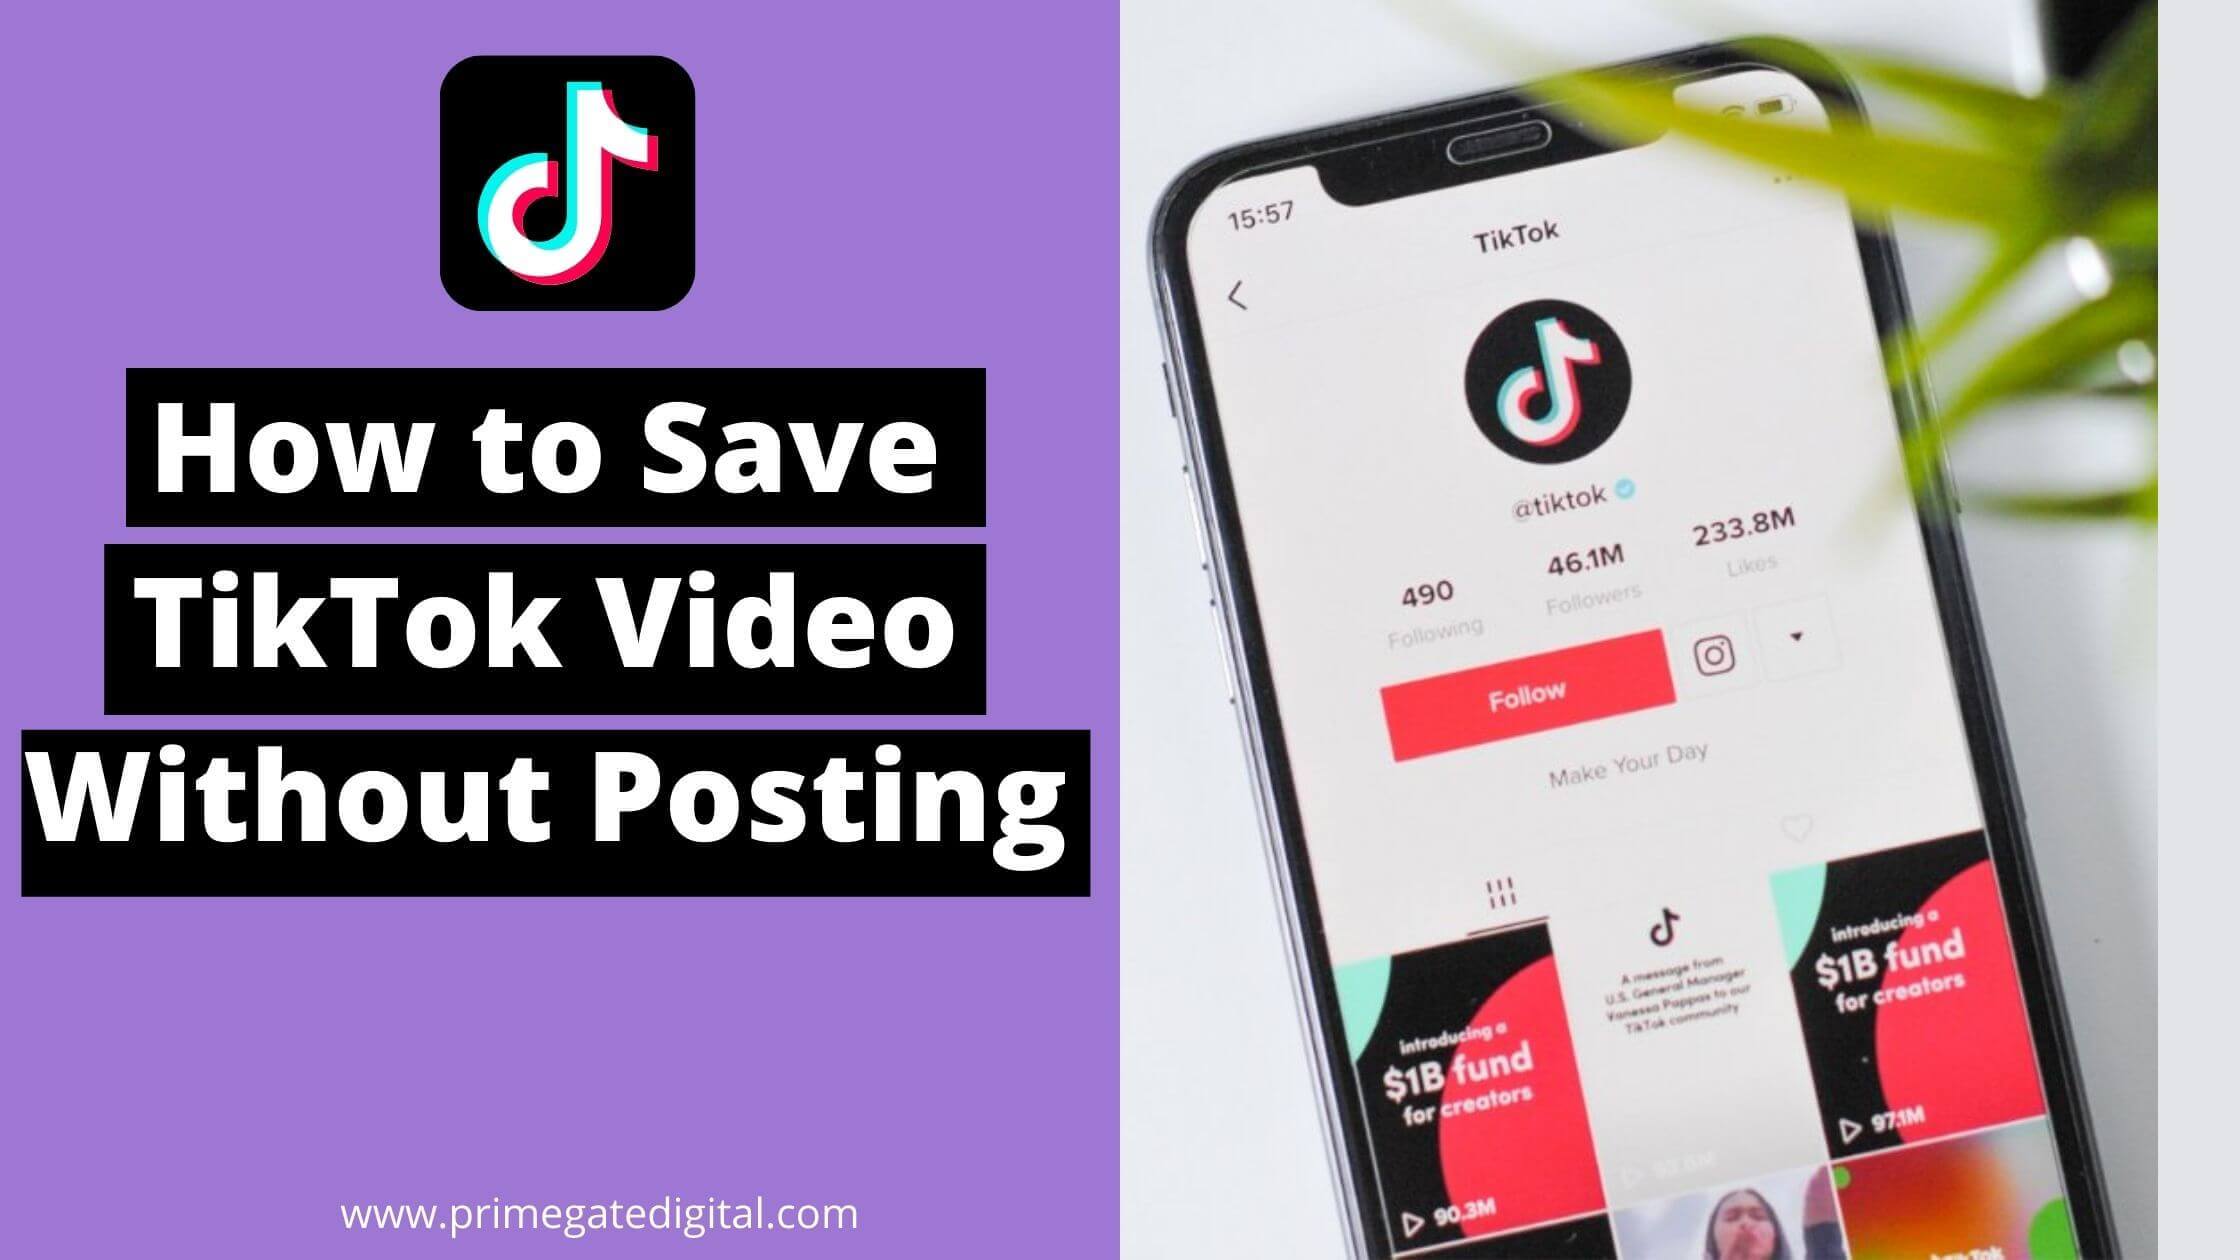 How to Save TikTok Video Without Posting